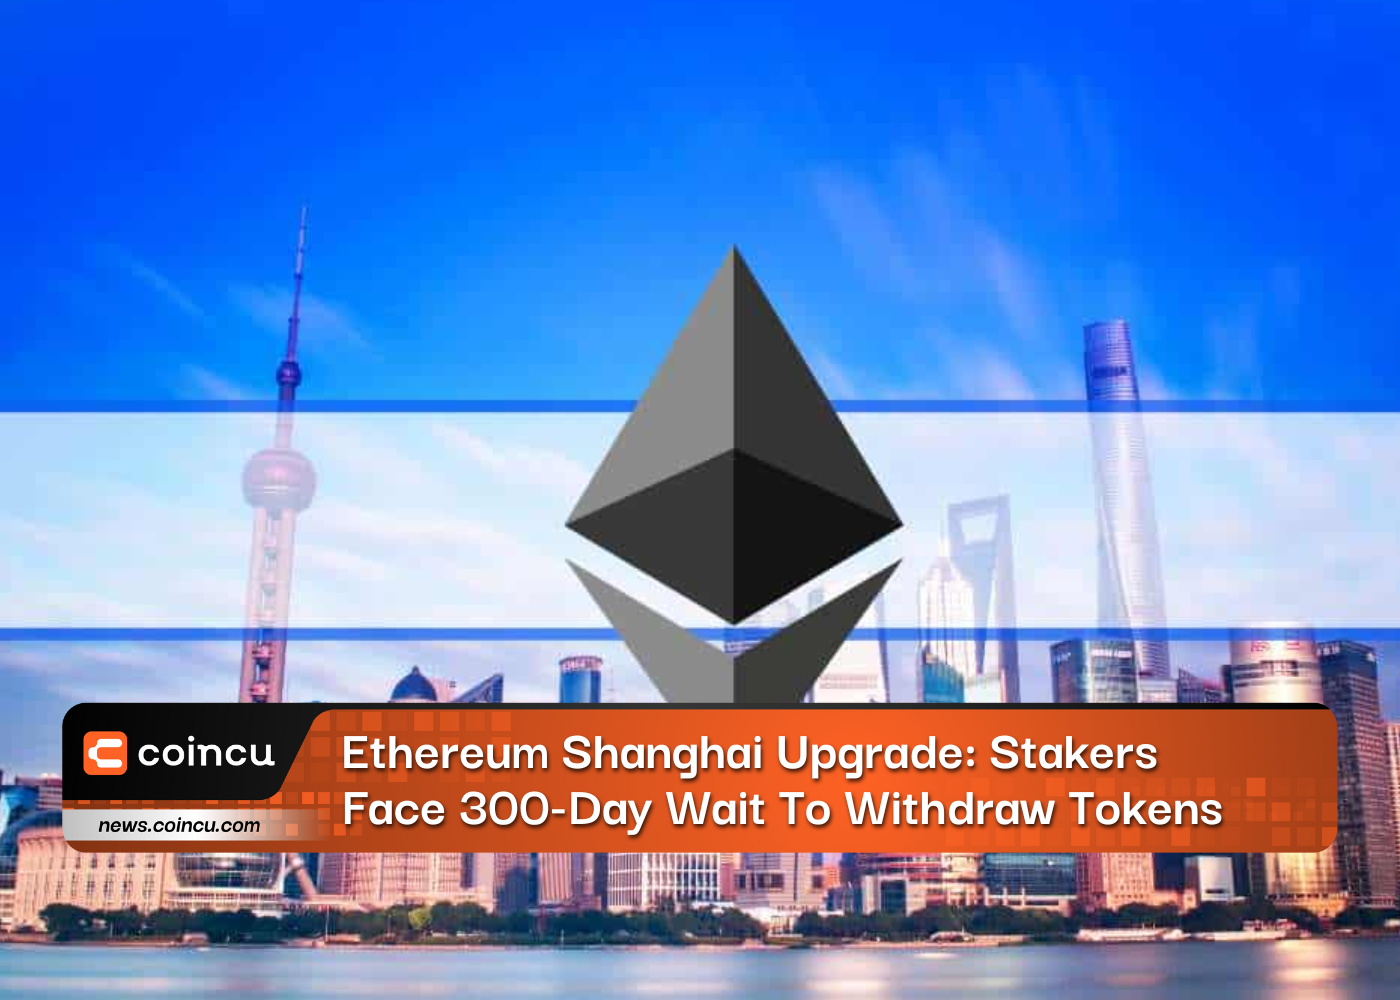 Ethereum Shanghai Upgrade: Stakers Face 300-Day Wait To Withdraw Tokens